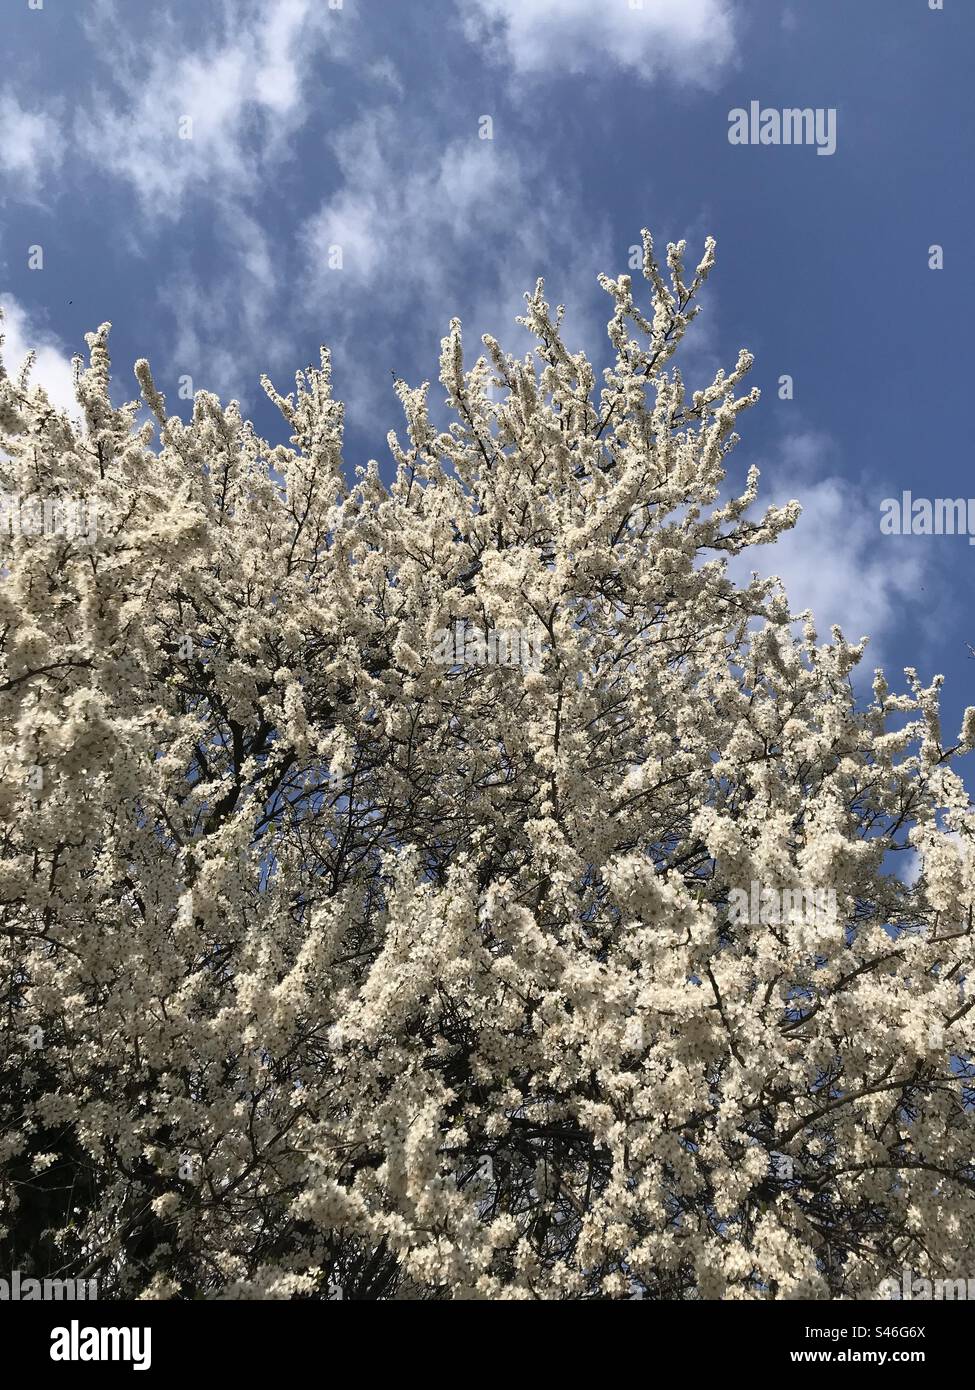 Tree in bloom with white flowers and a blue clear sky. Stock Photo